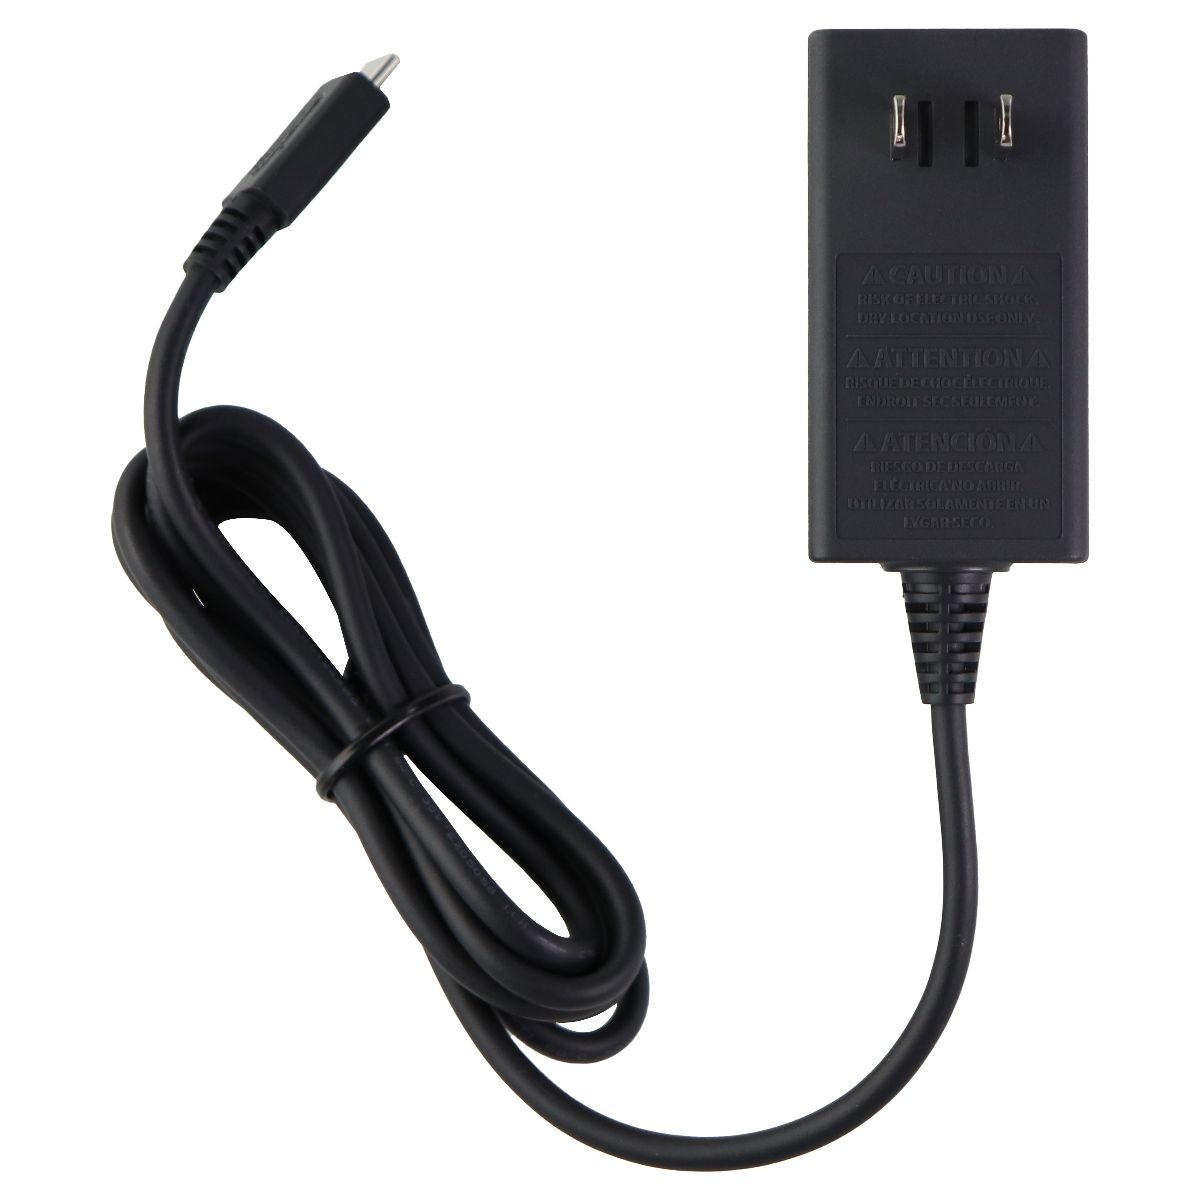 Restored Nintendo Switch AC Adapter Wall Charger USB-C Cable - Black OEM (HACAADHGA) (Refurbished) - image 1 of 4